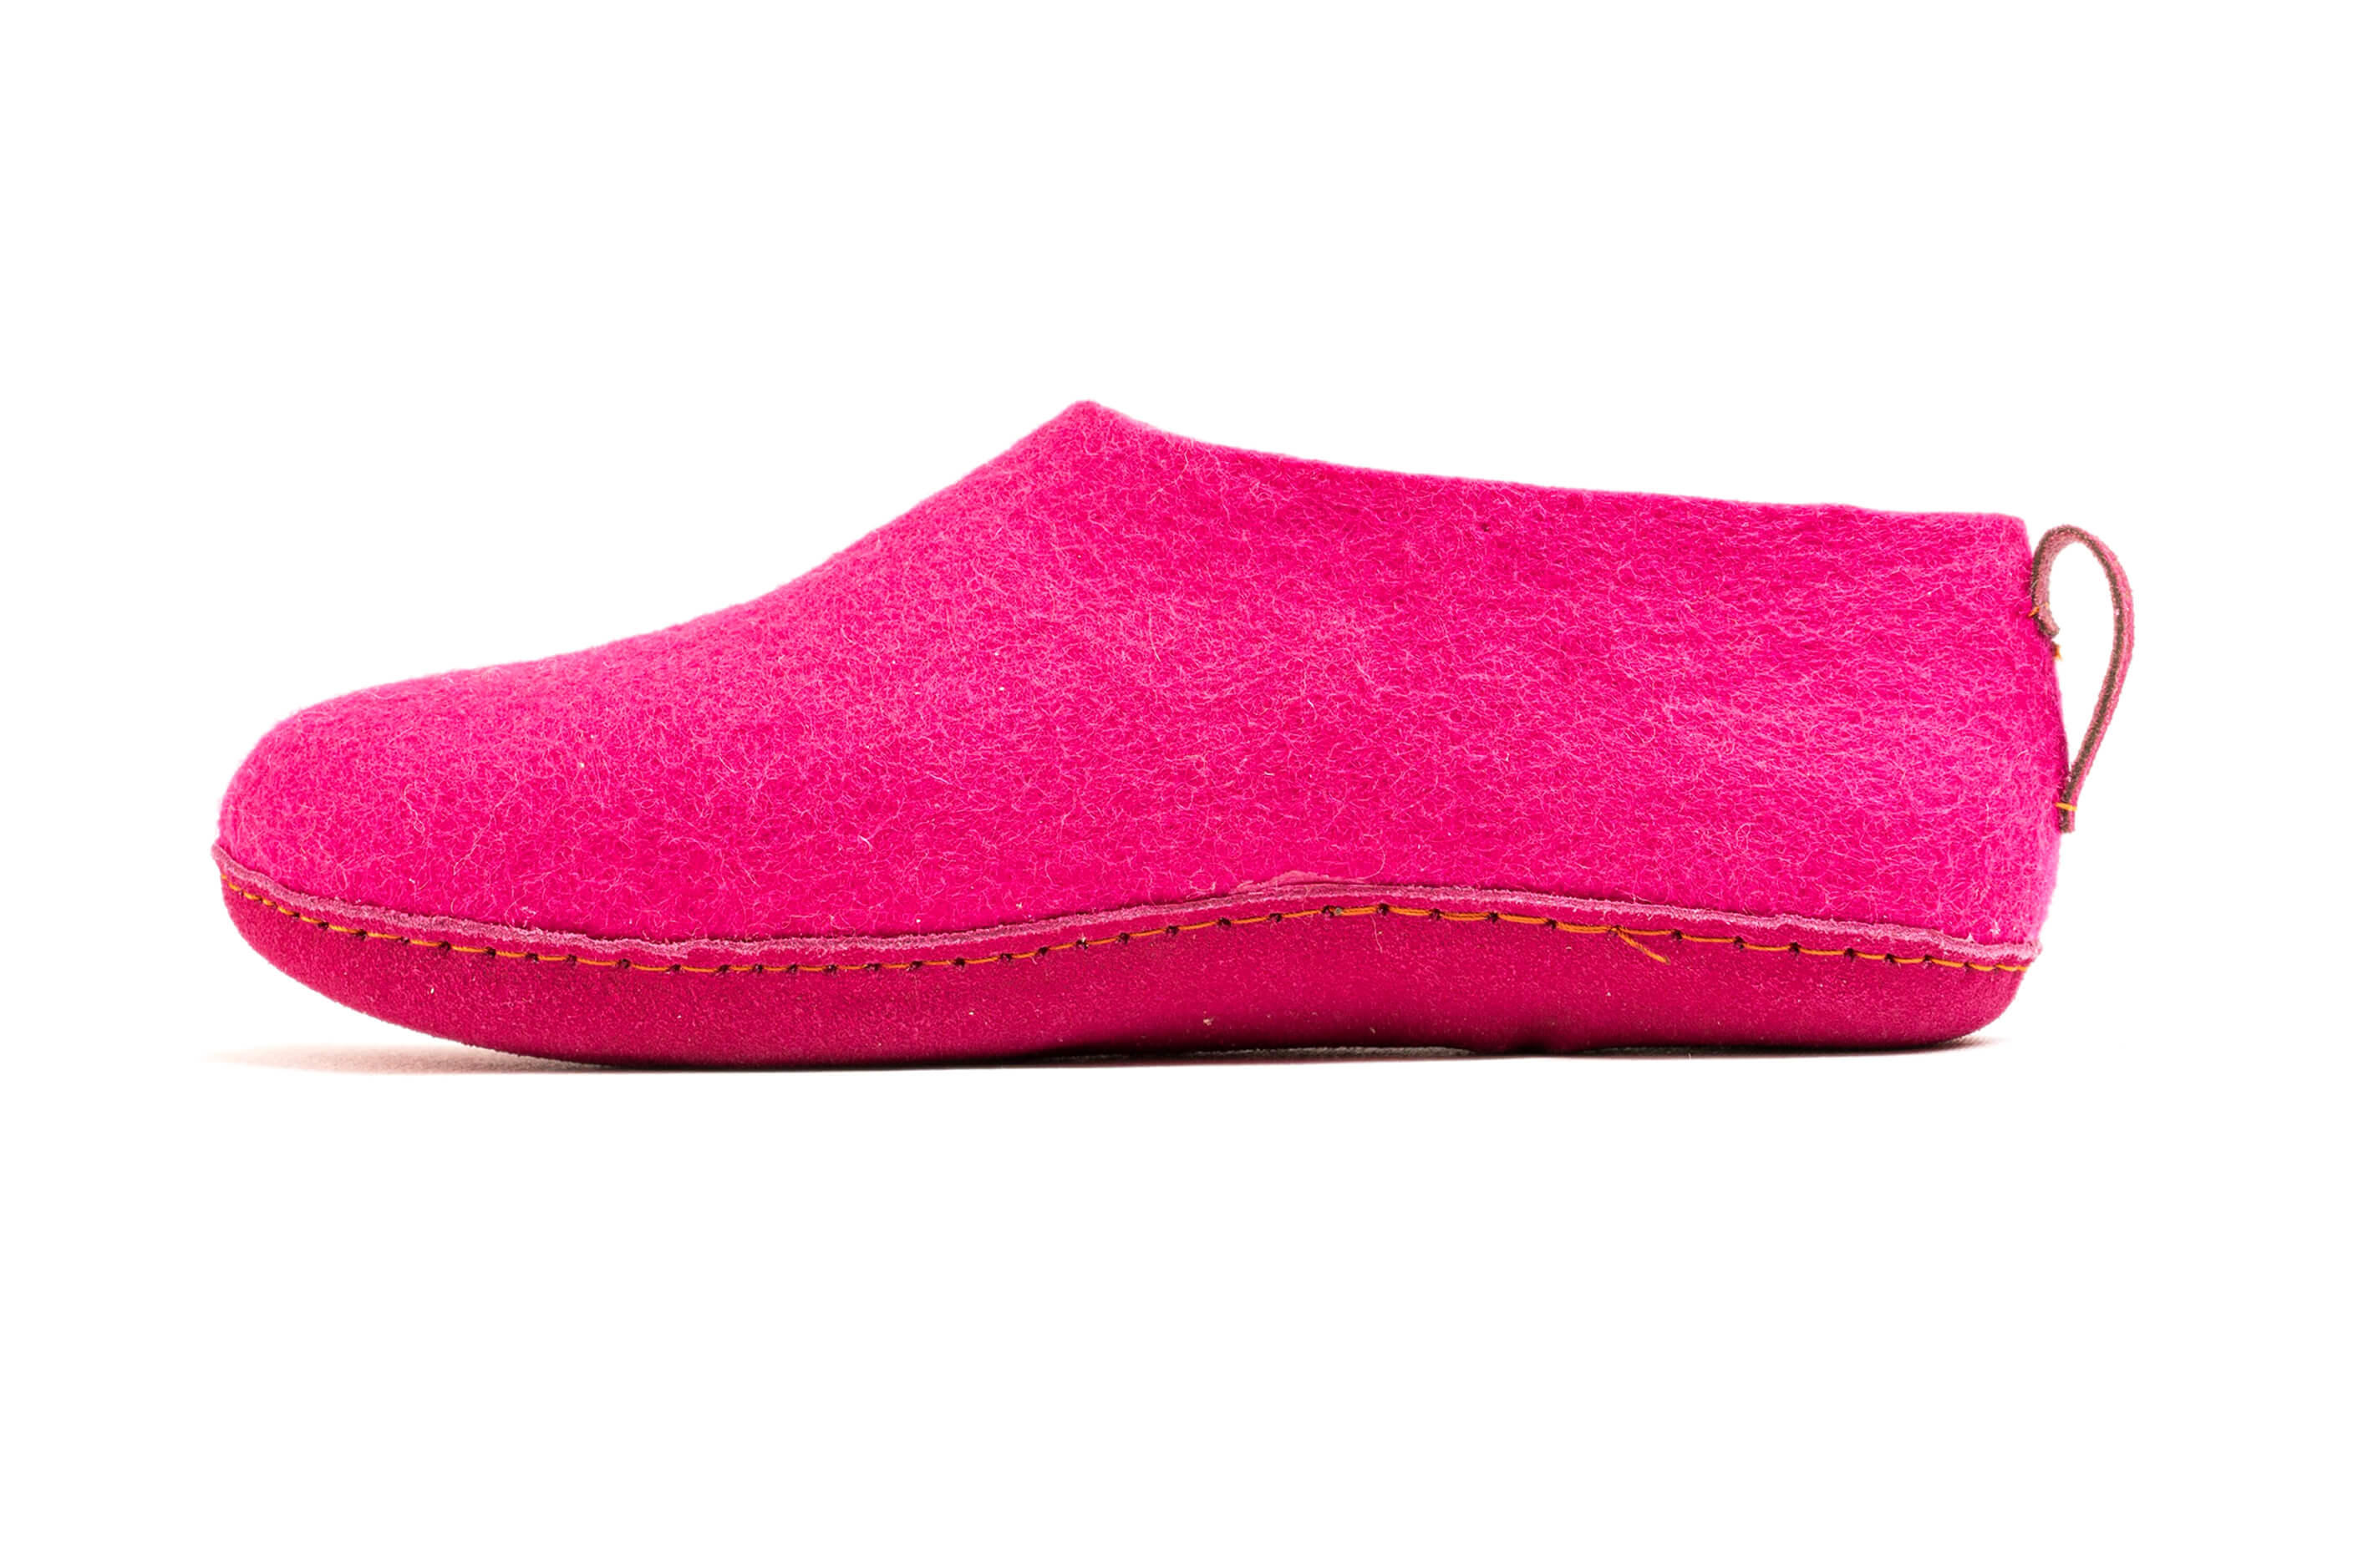 Indoor Shoes With Leather Sole - Fuchsia